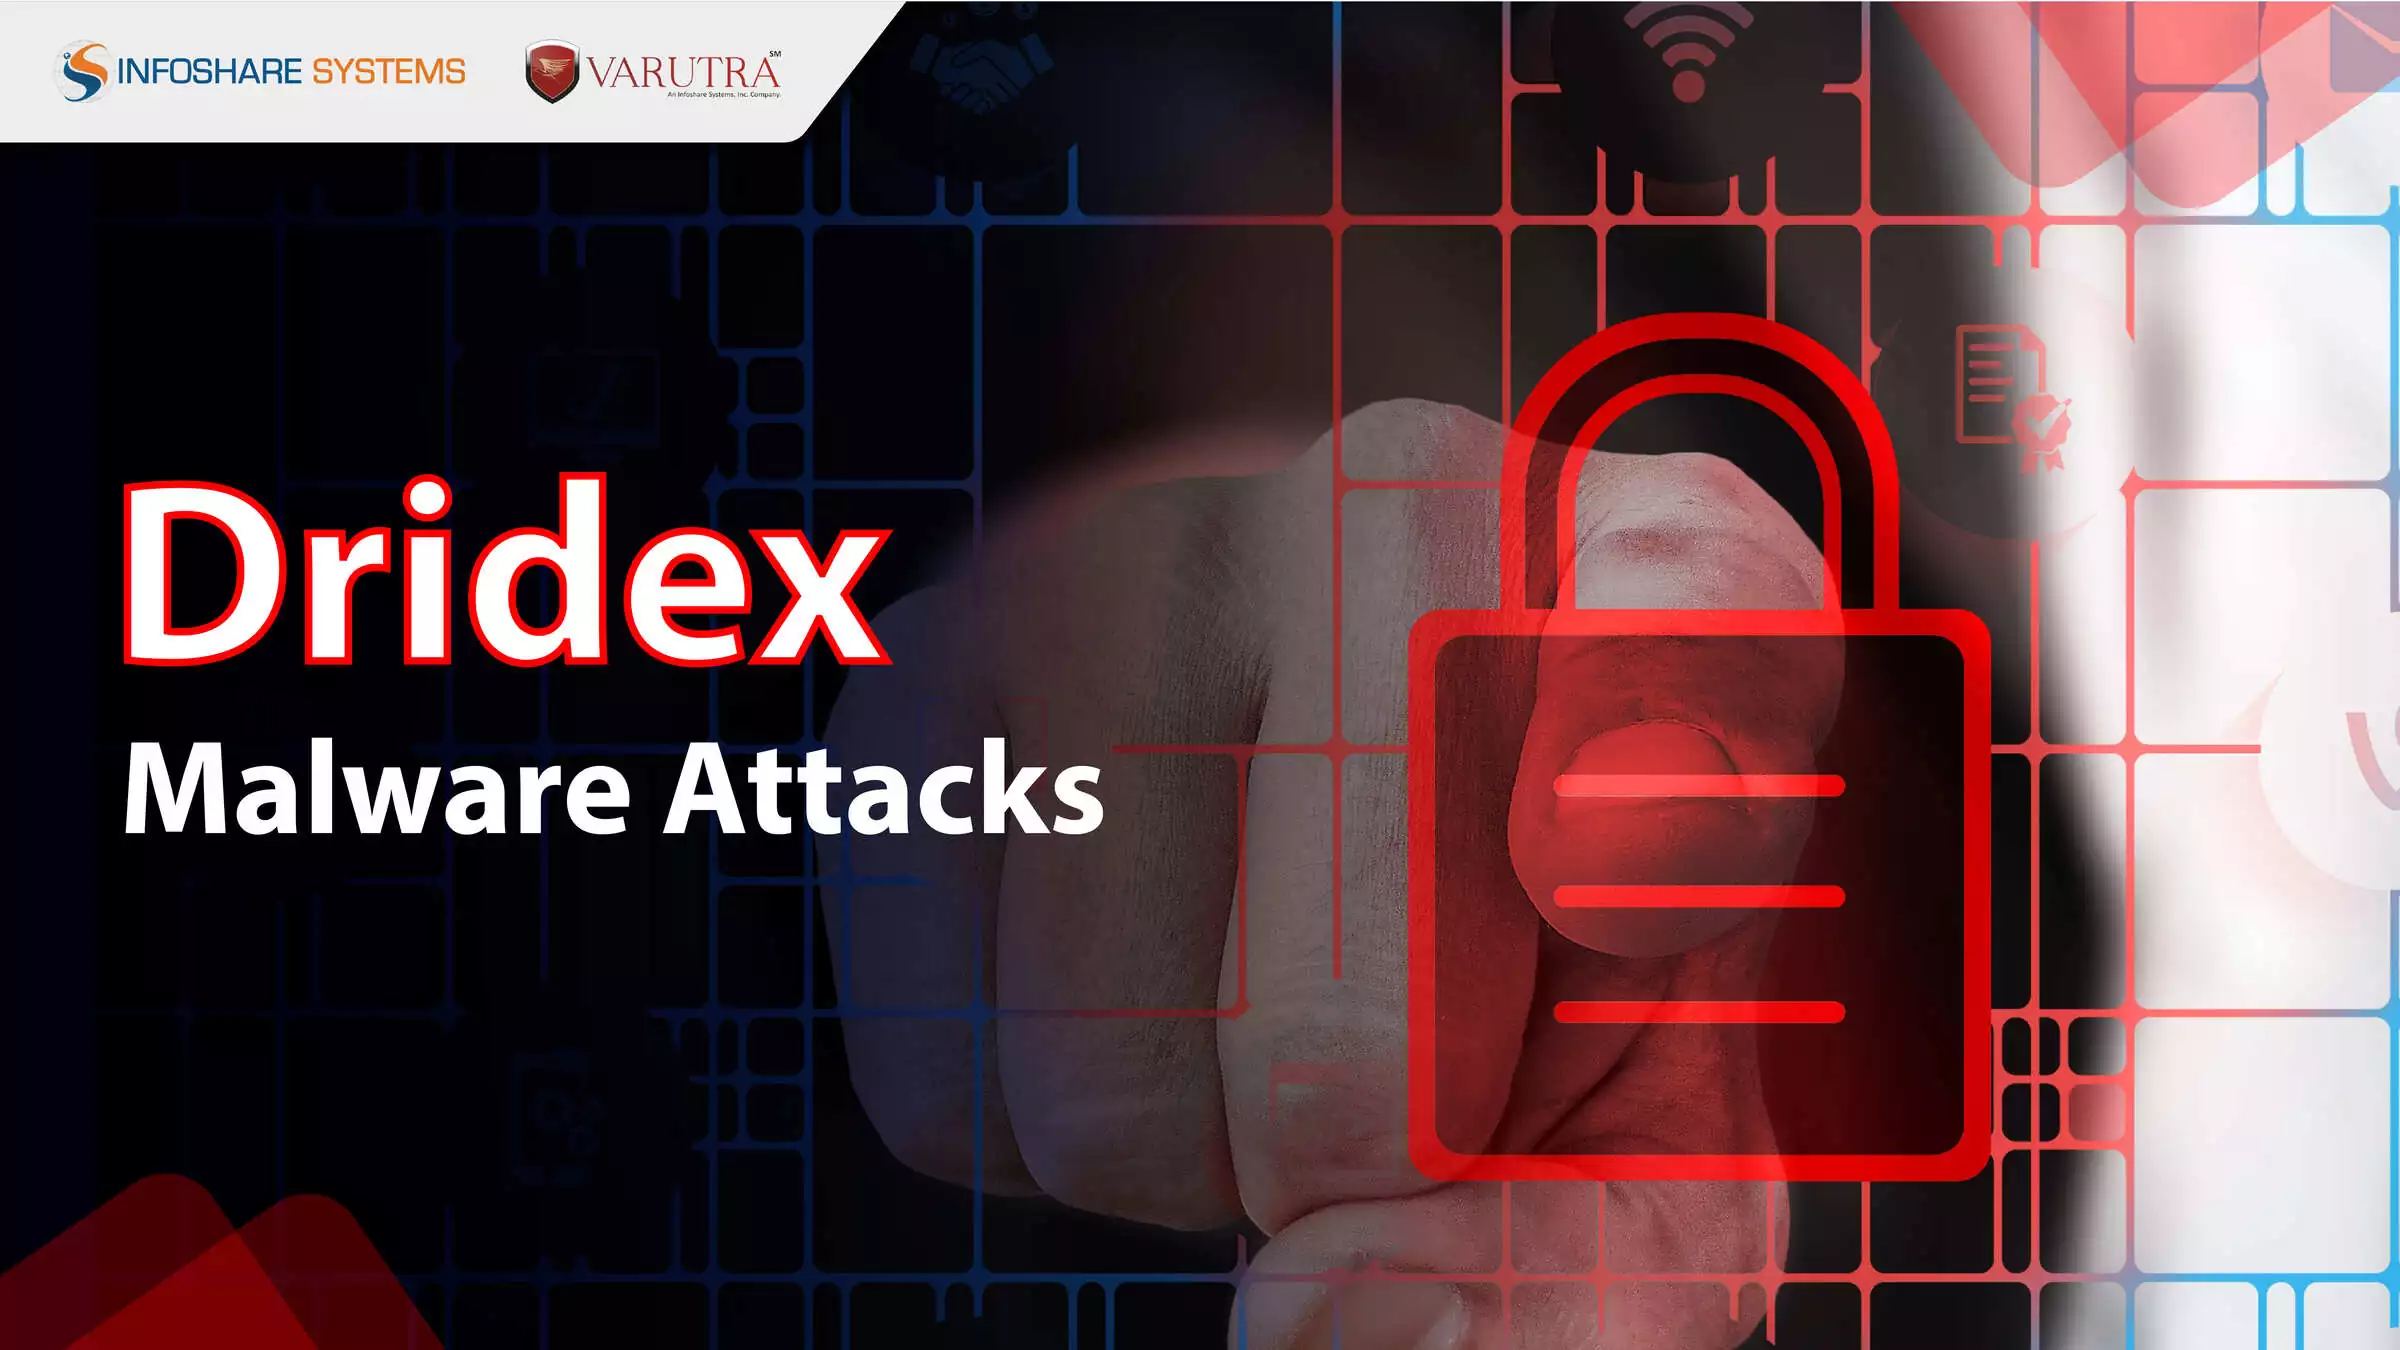 How Hackers Use Social Engineering to Spread Dridex Malware How Hackers Use Social Engineering to Spread Dridex Malware Dridex Malware